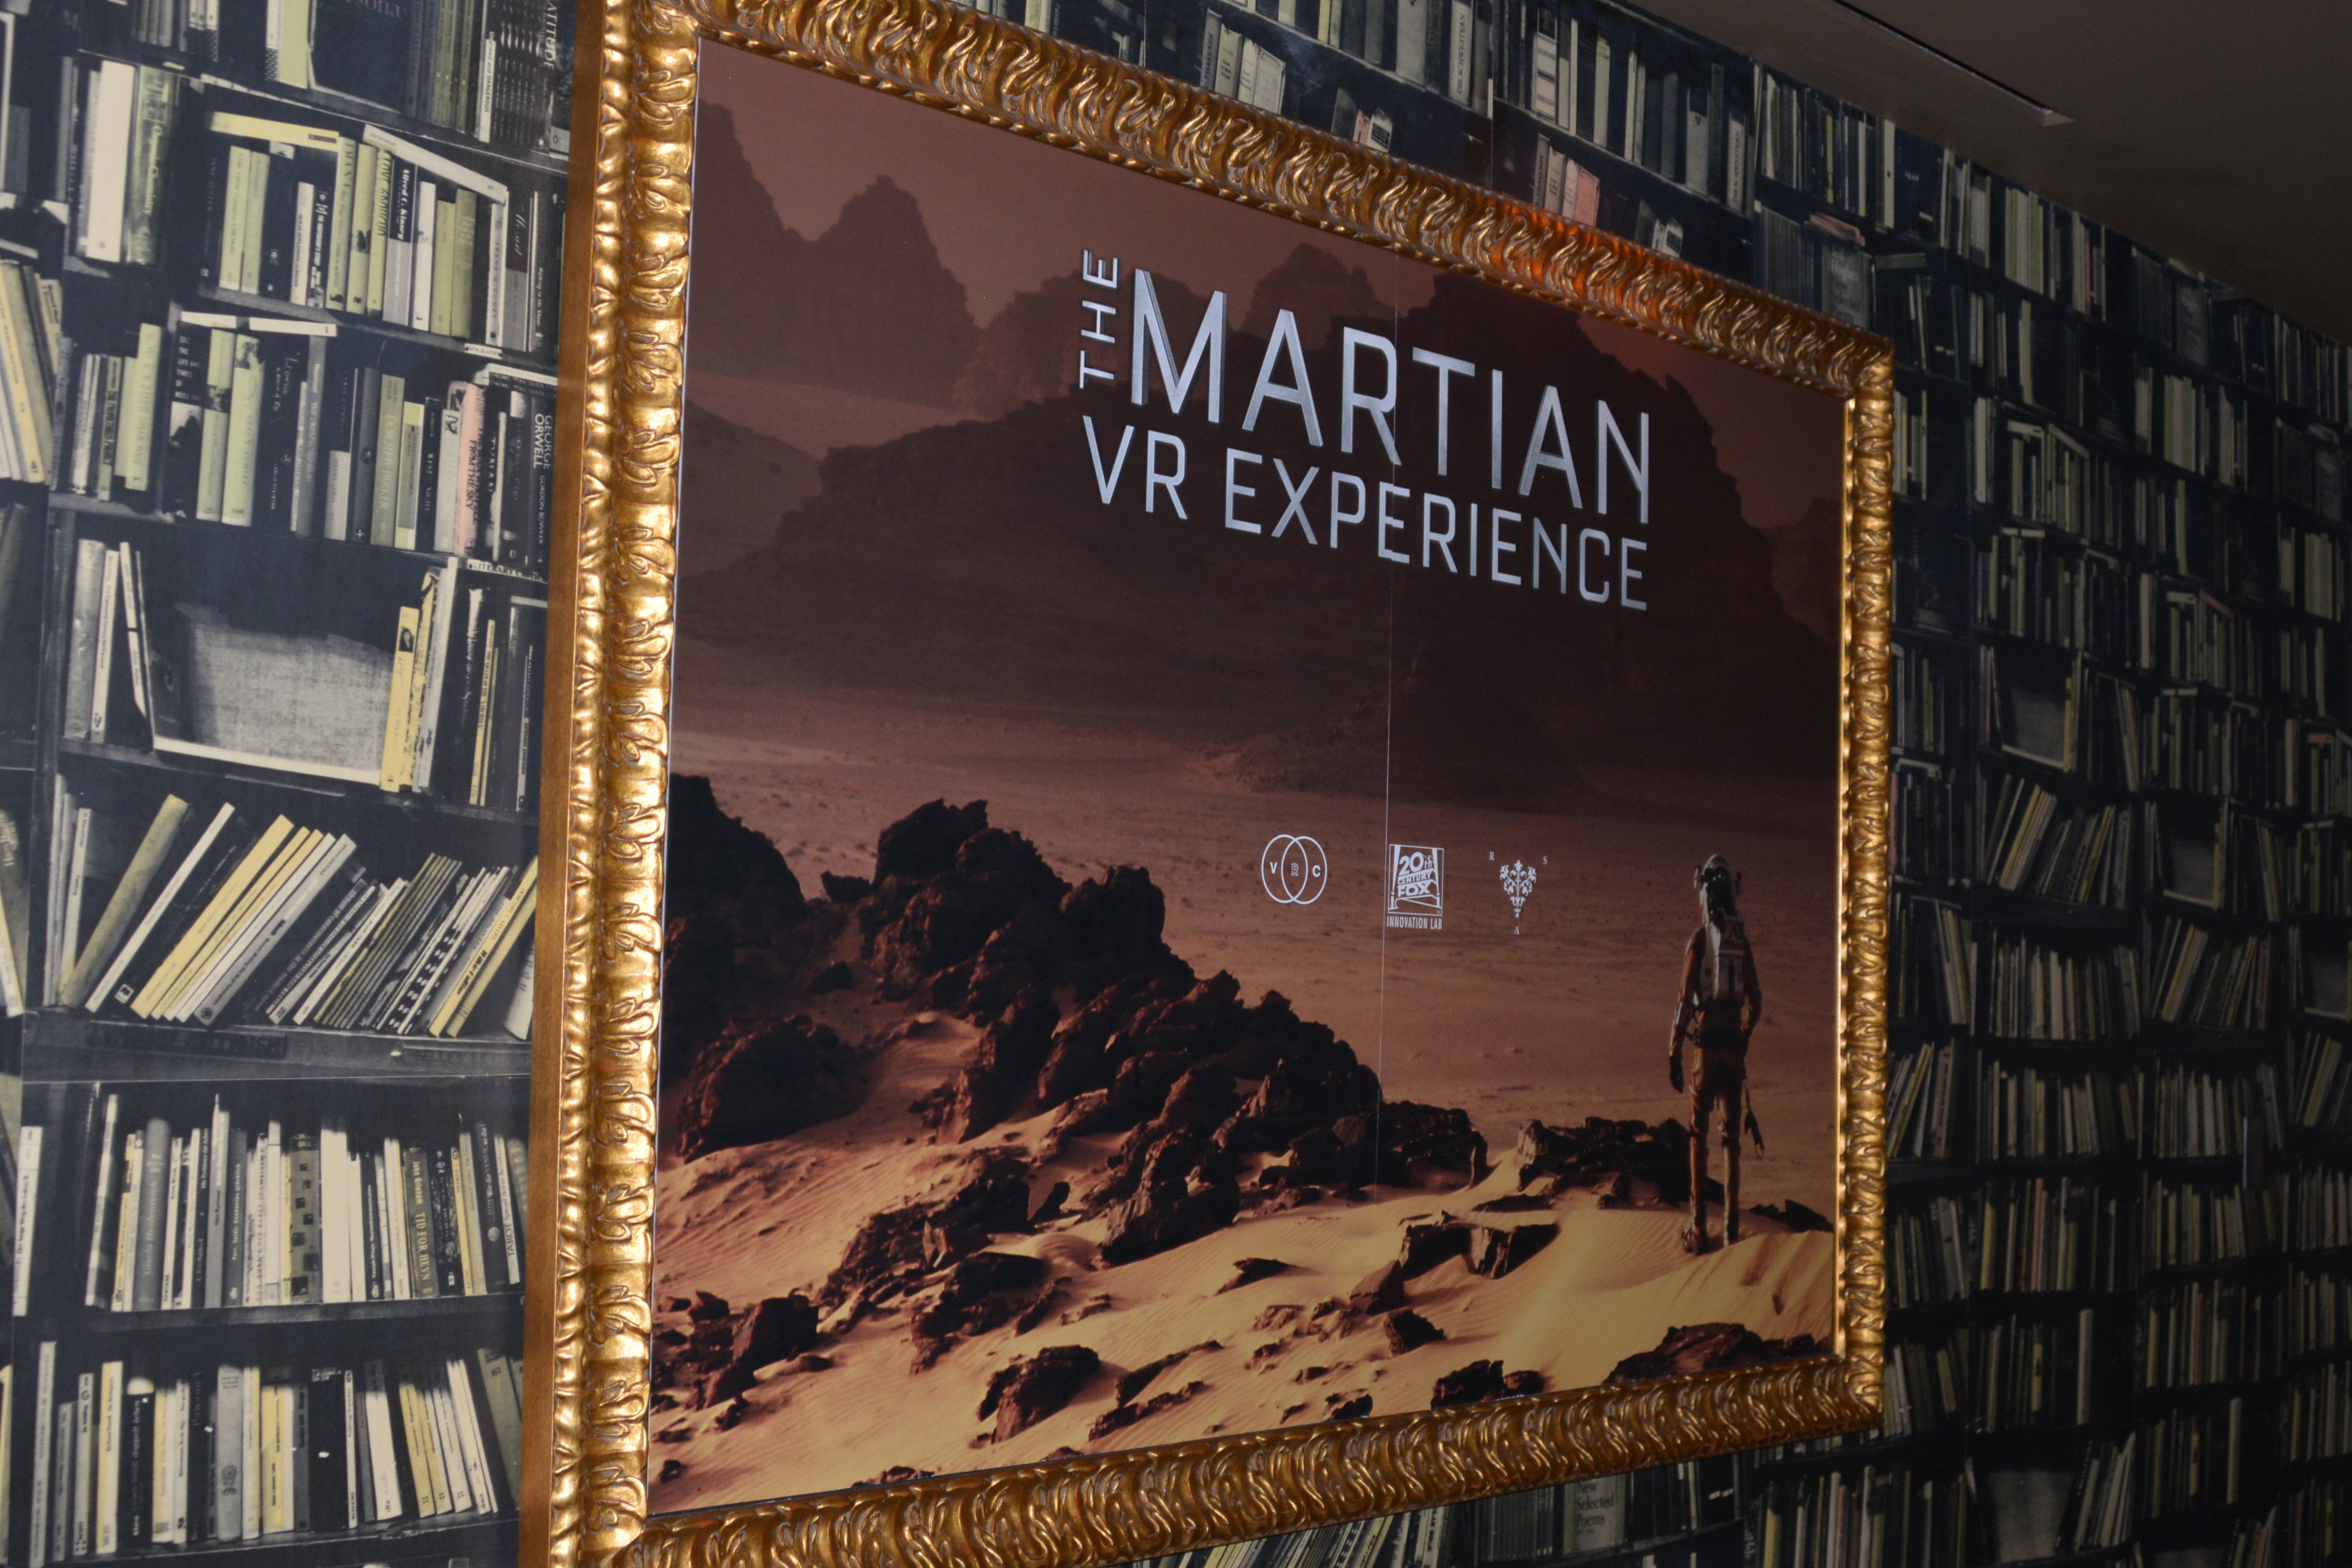 Fox pushes virtual reality to the limit with 30 minutes on Mars